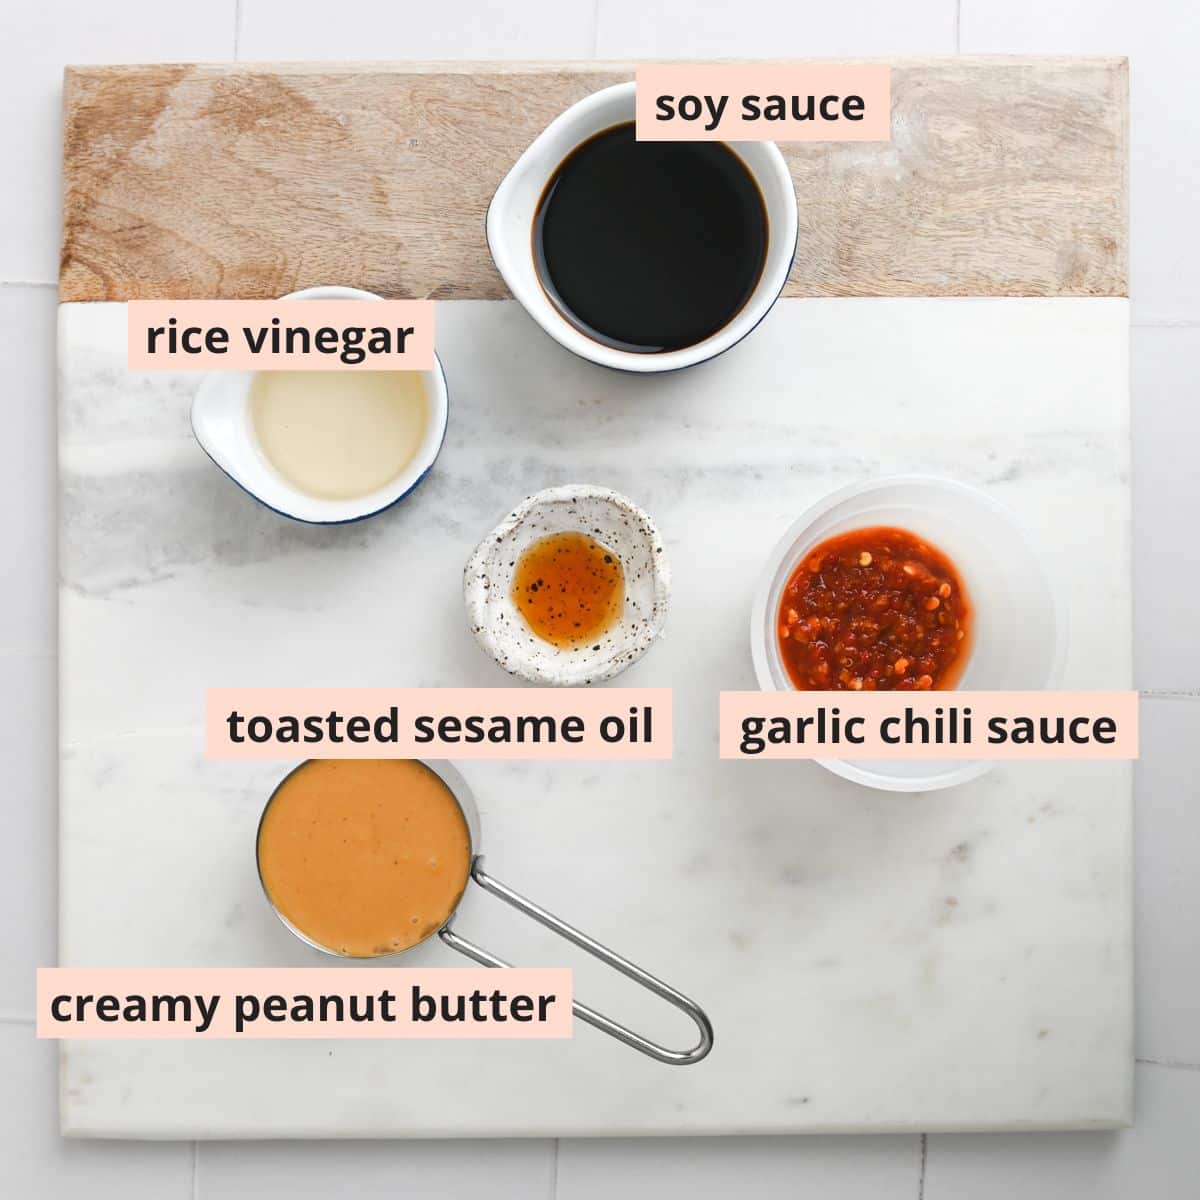 Labeled ingredients used to make peanut sauce.